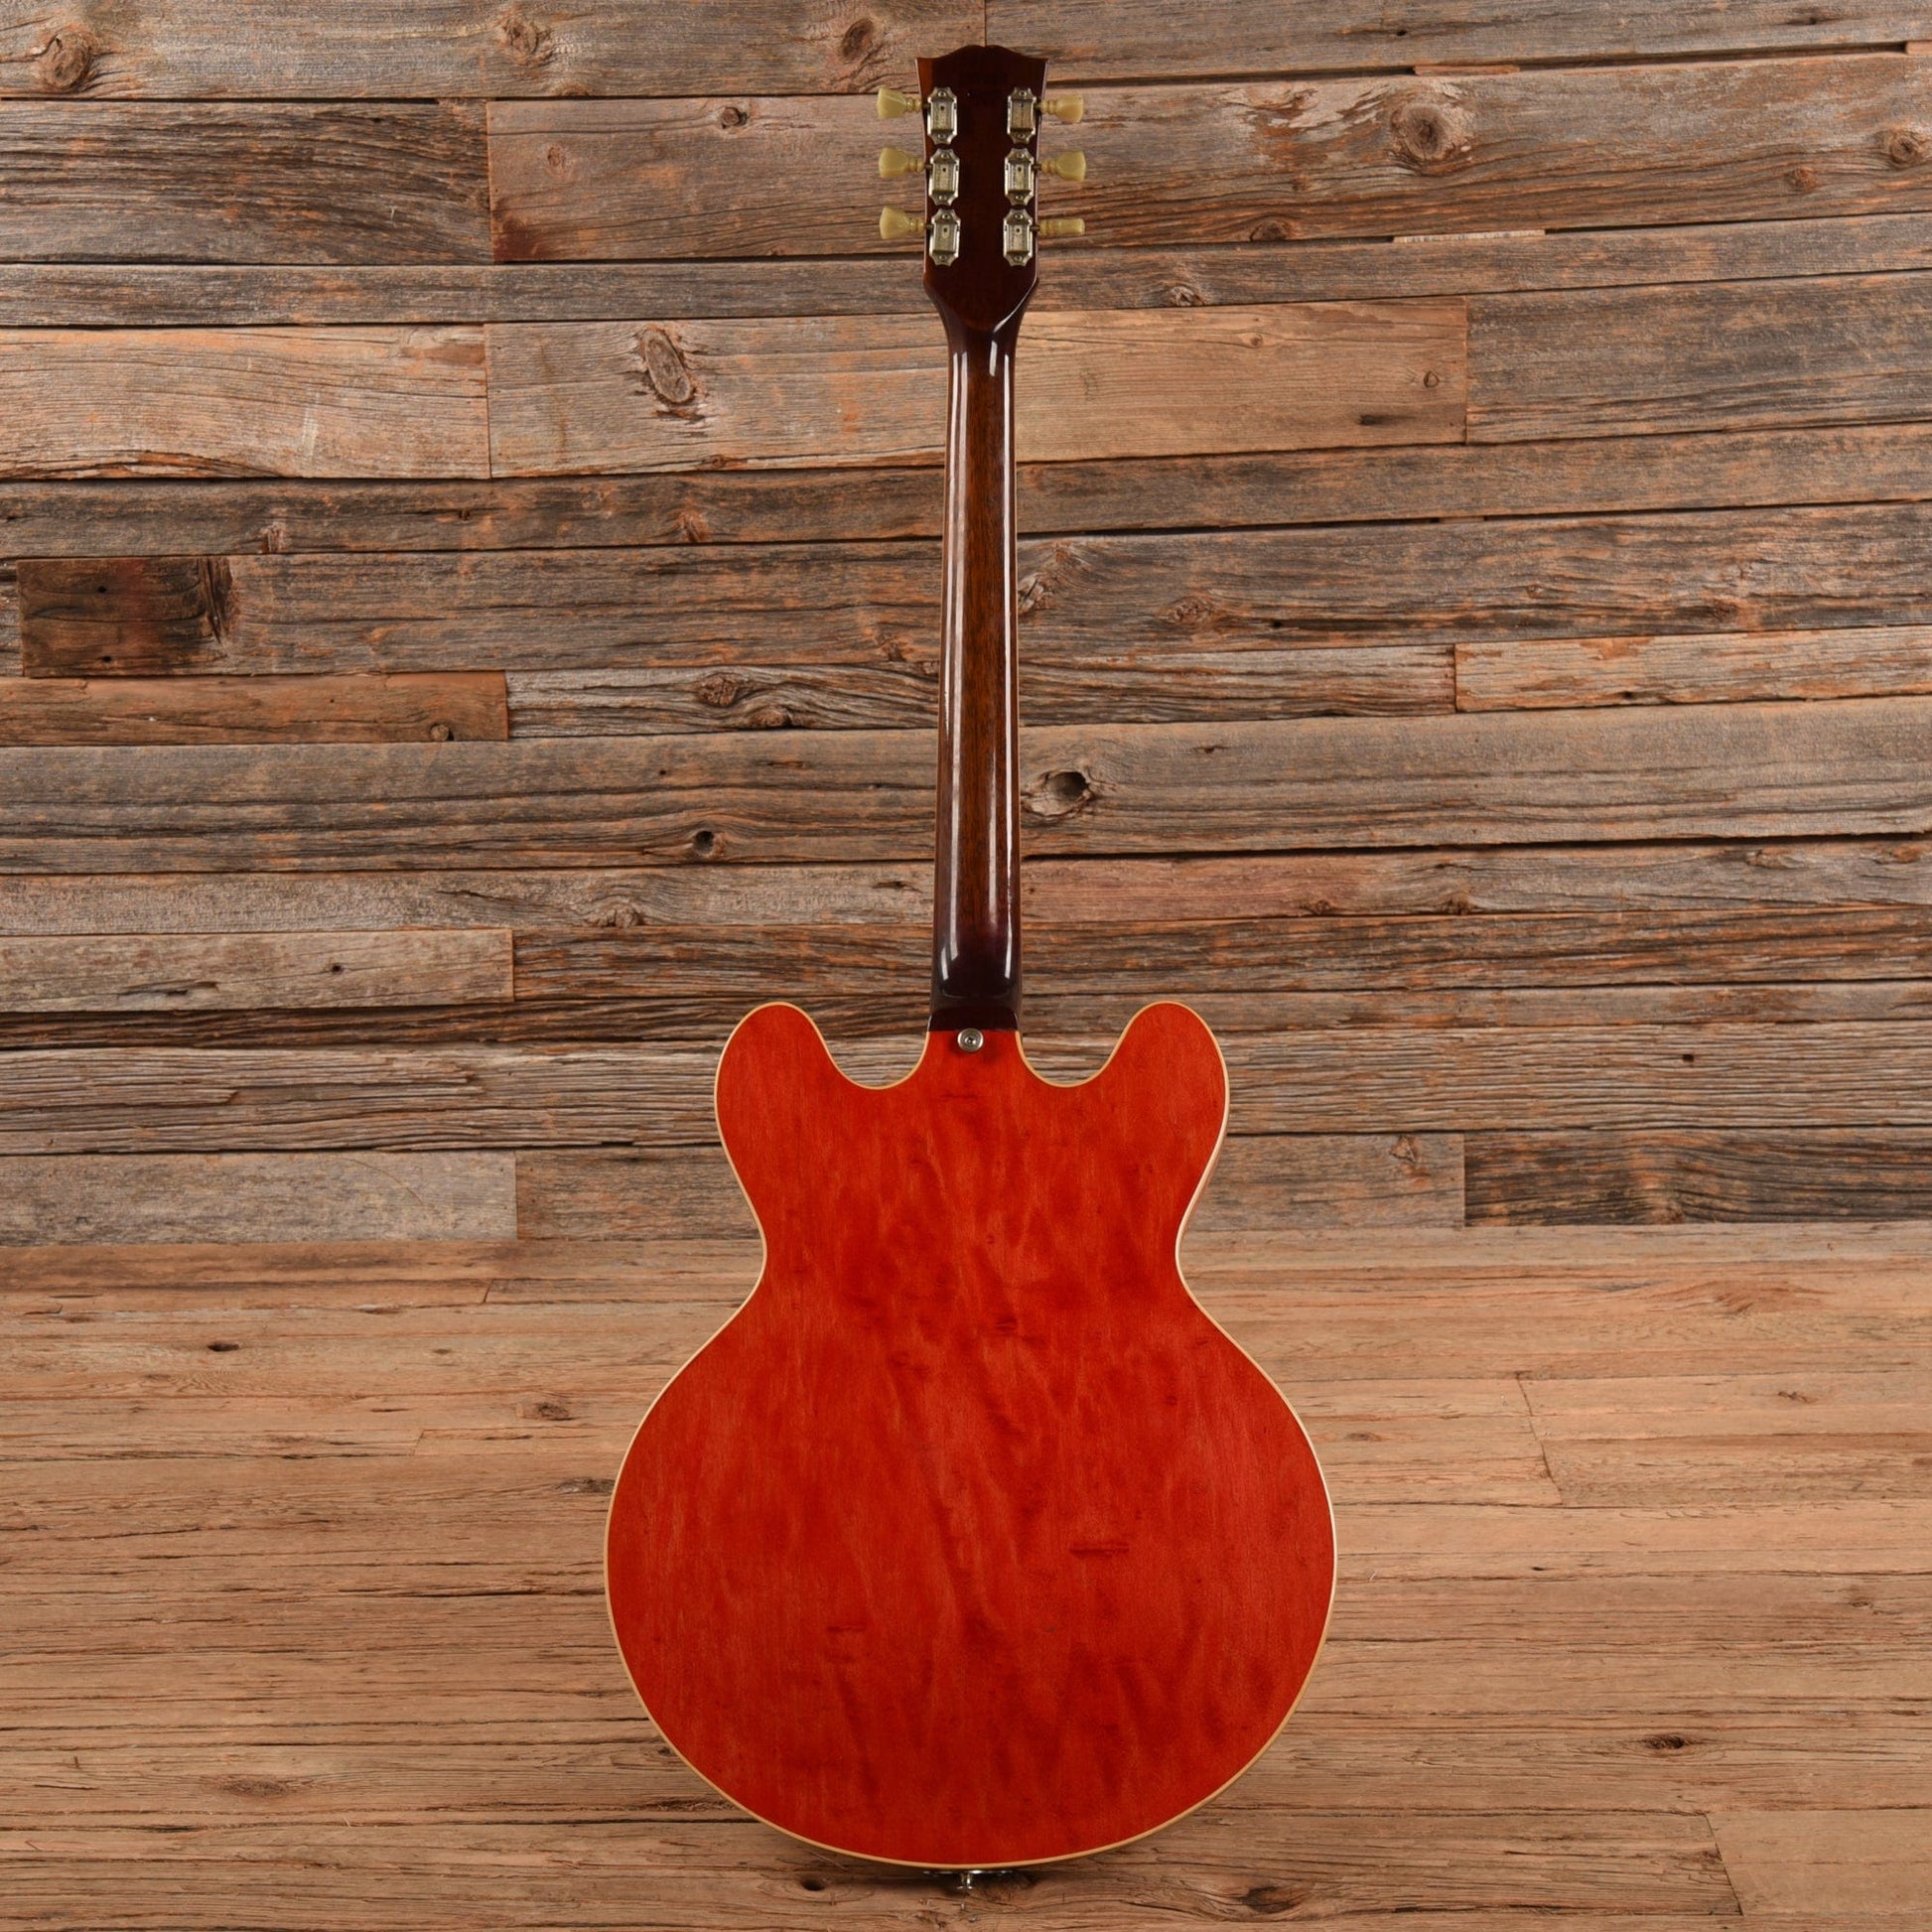 Gibson ES-335TD Cherry Red 1973 Electric Guitars / Semi-Hollow